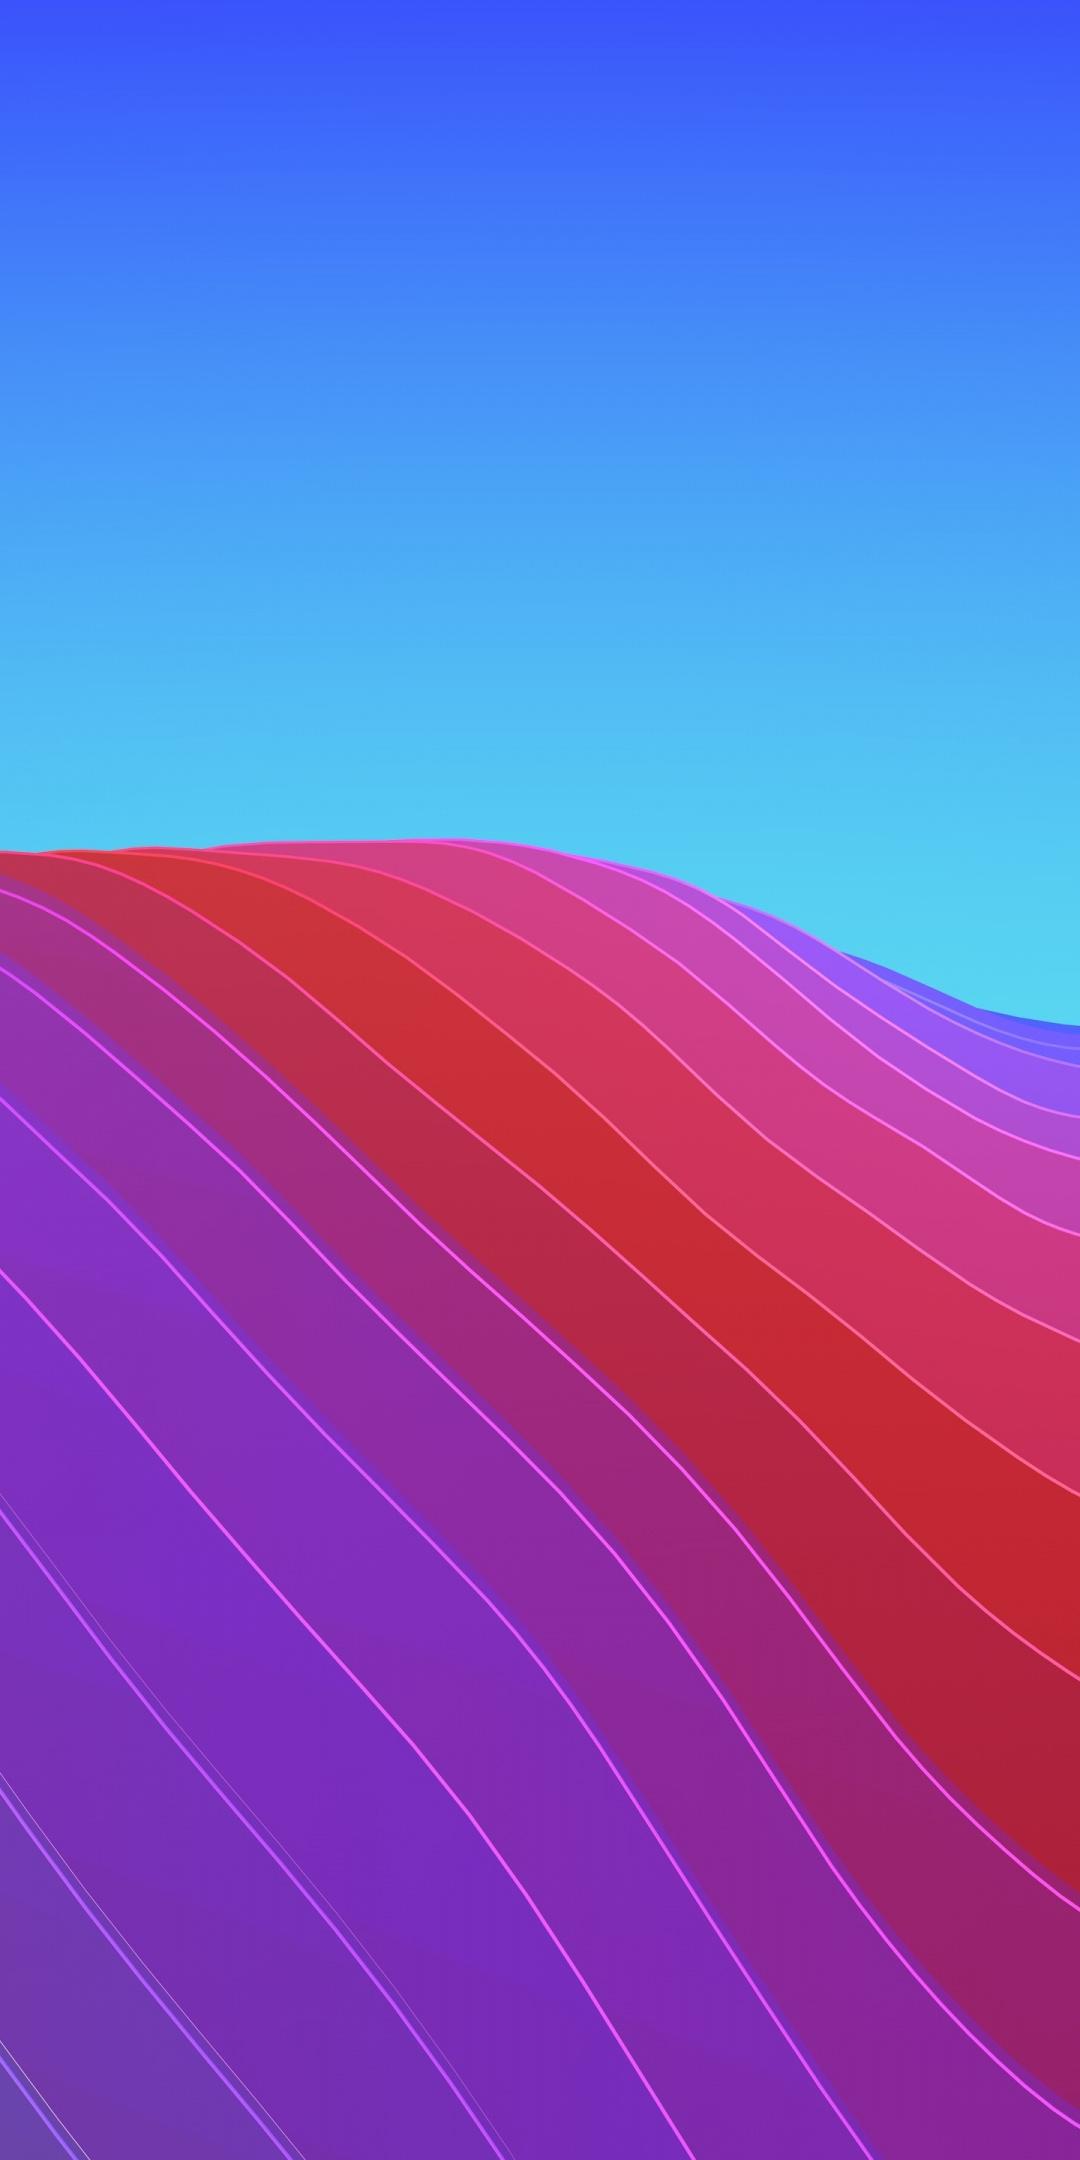 Download 1080x2160 wallpaper waves, abstract, gradient, ios 11